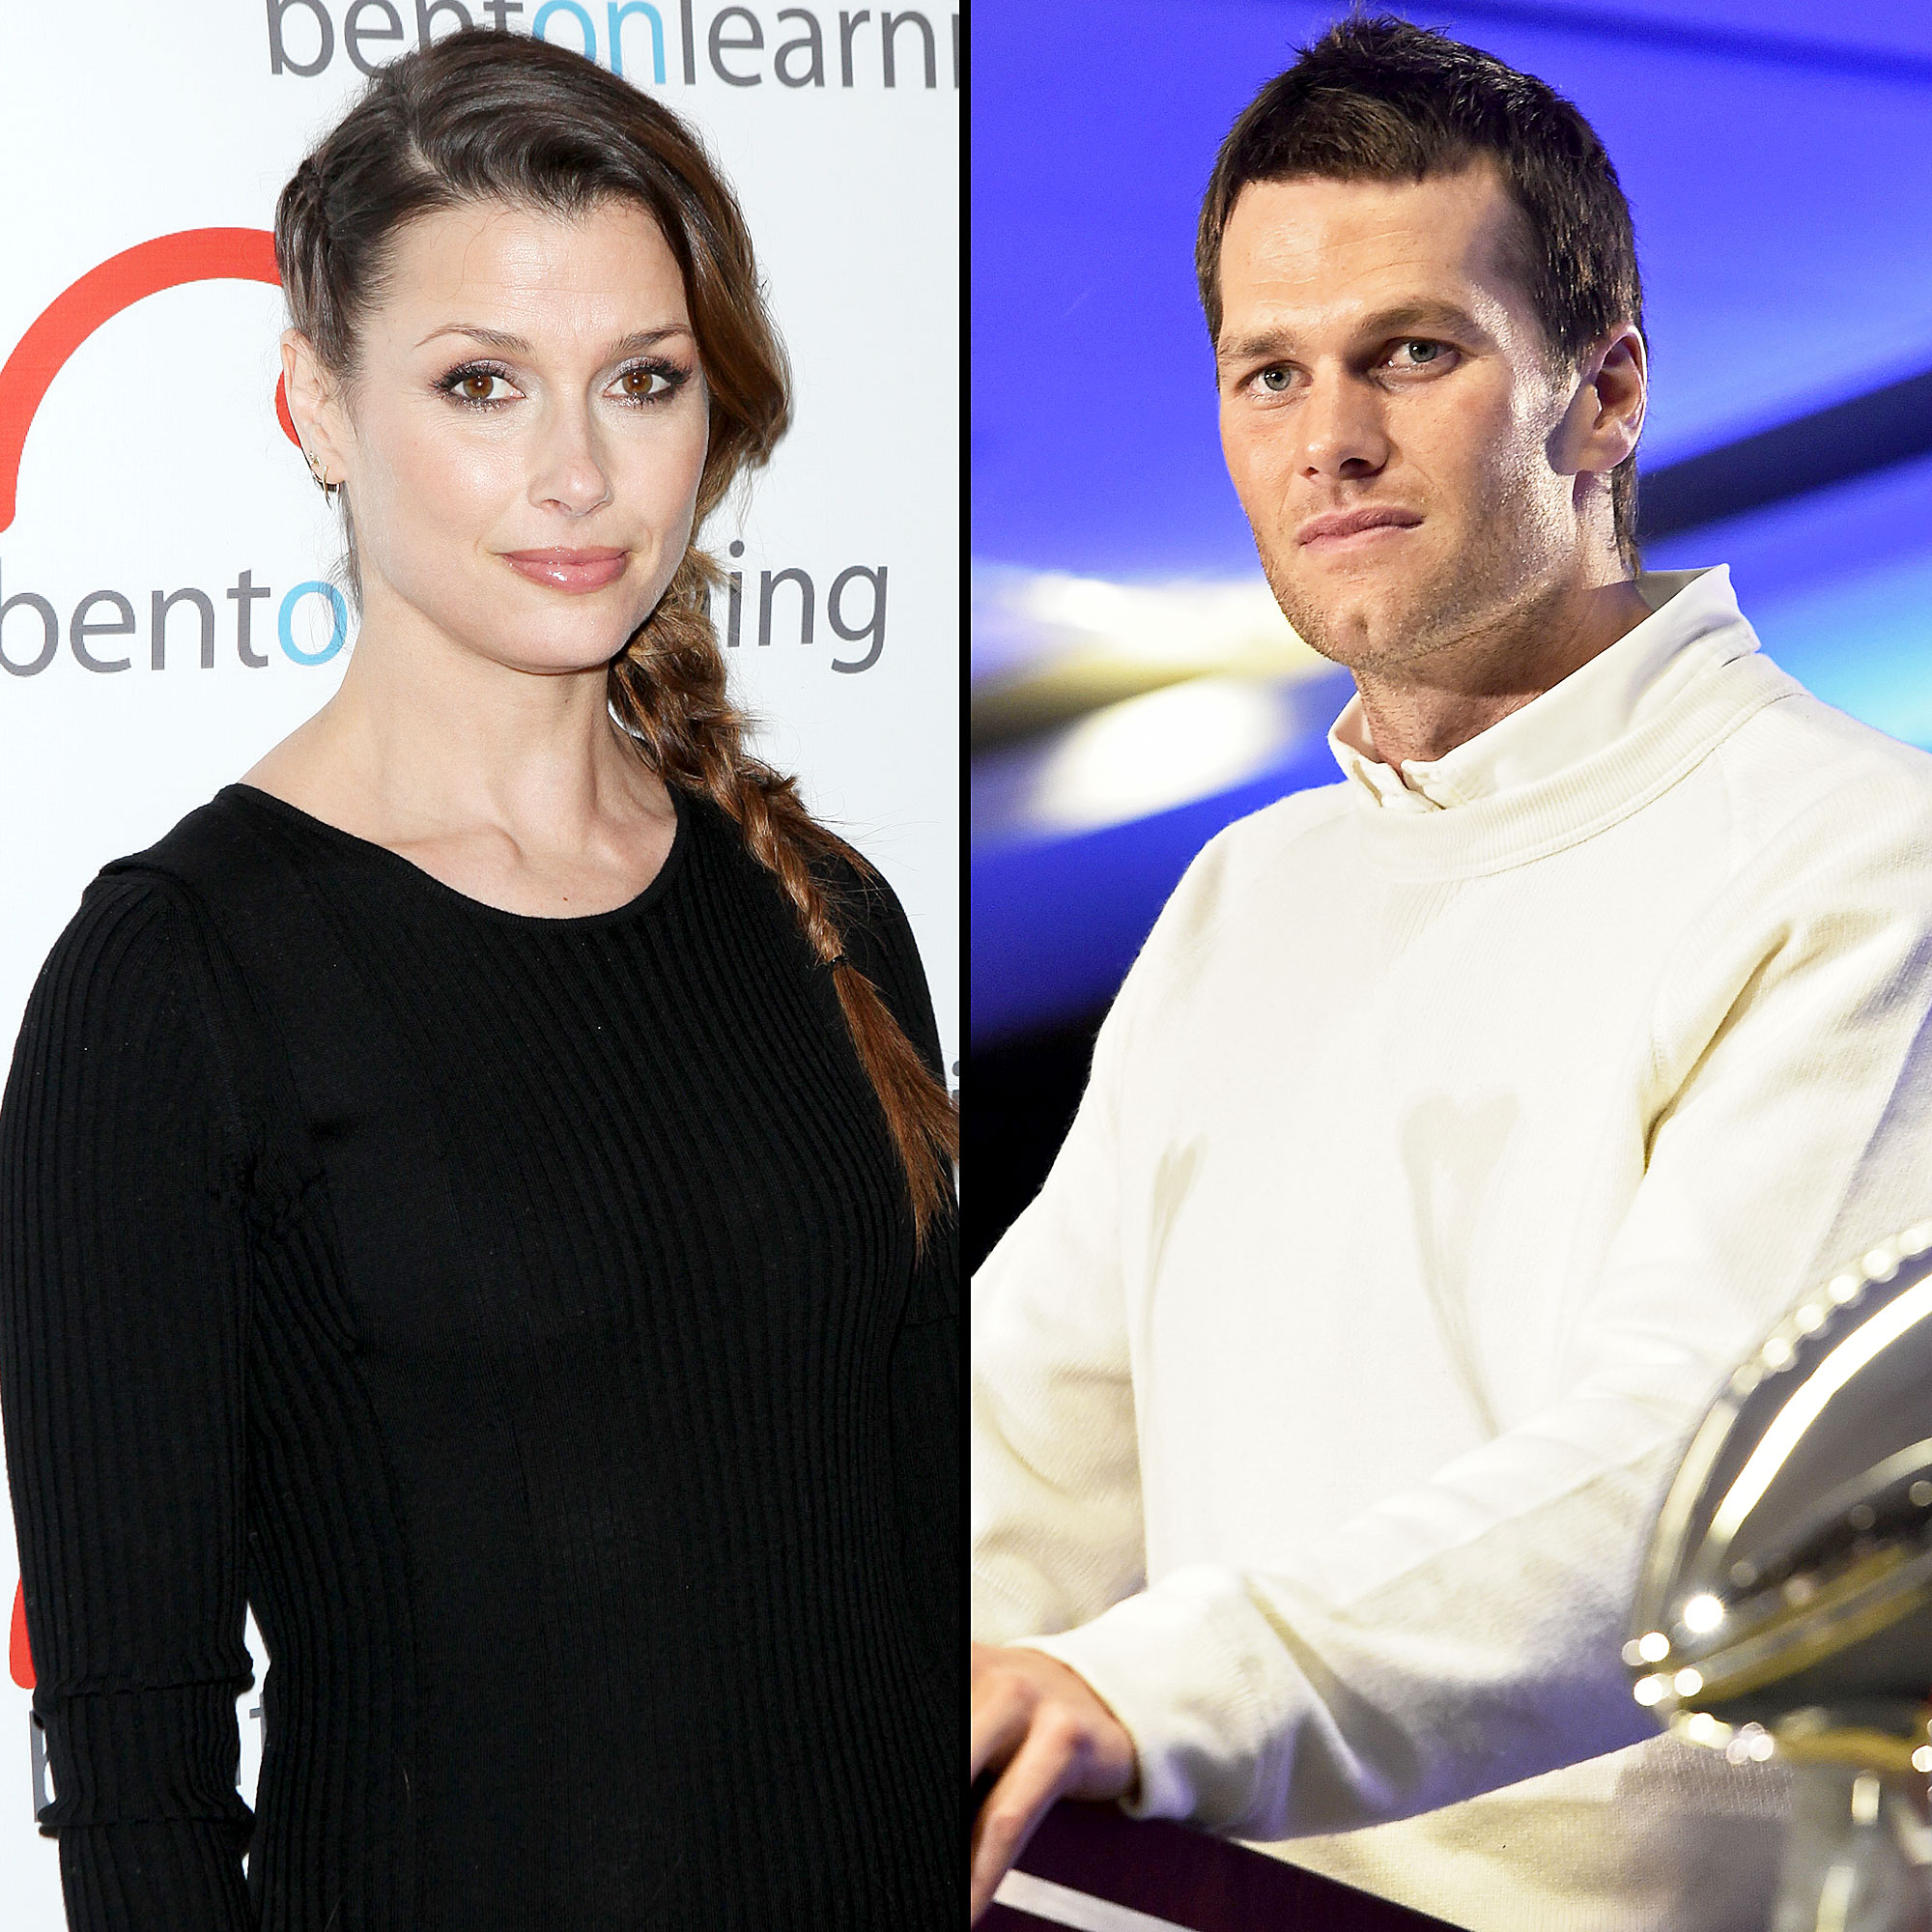 Bridget Moynahans Quotes About Her Relationship With Ex Tom Brady image photo